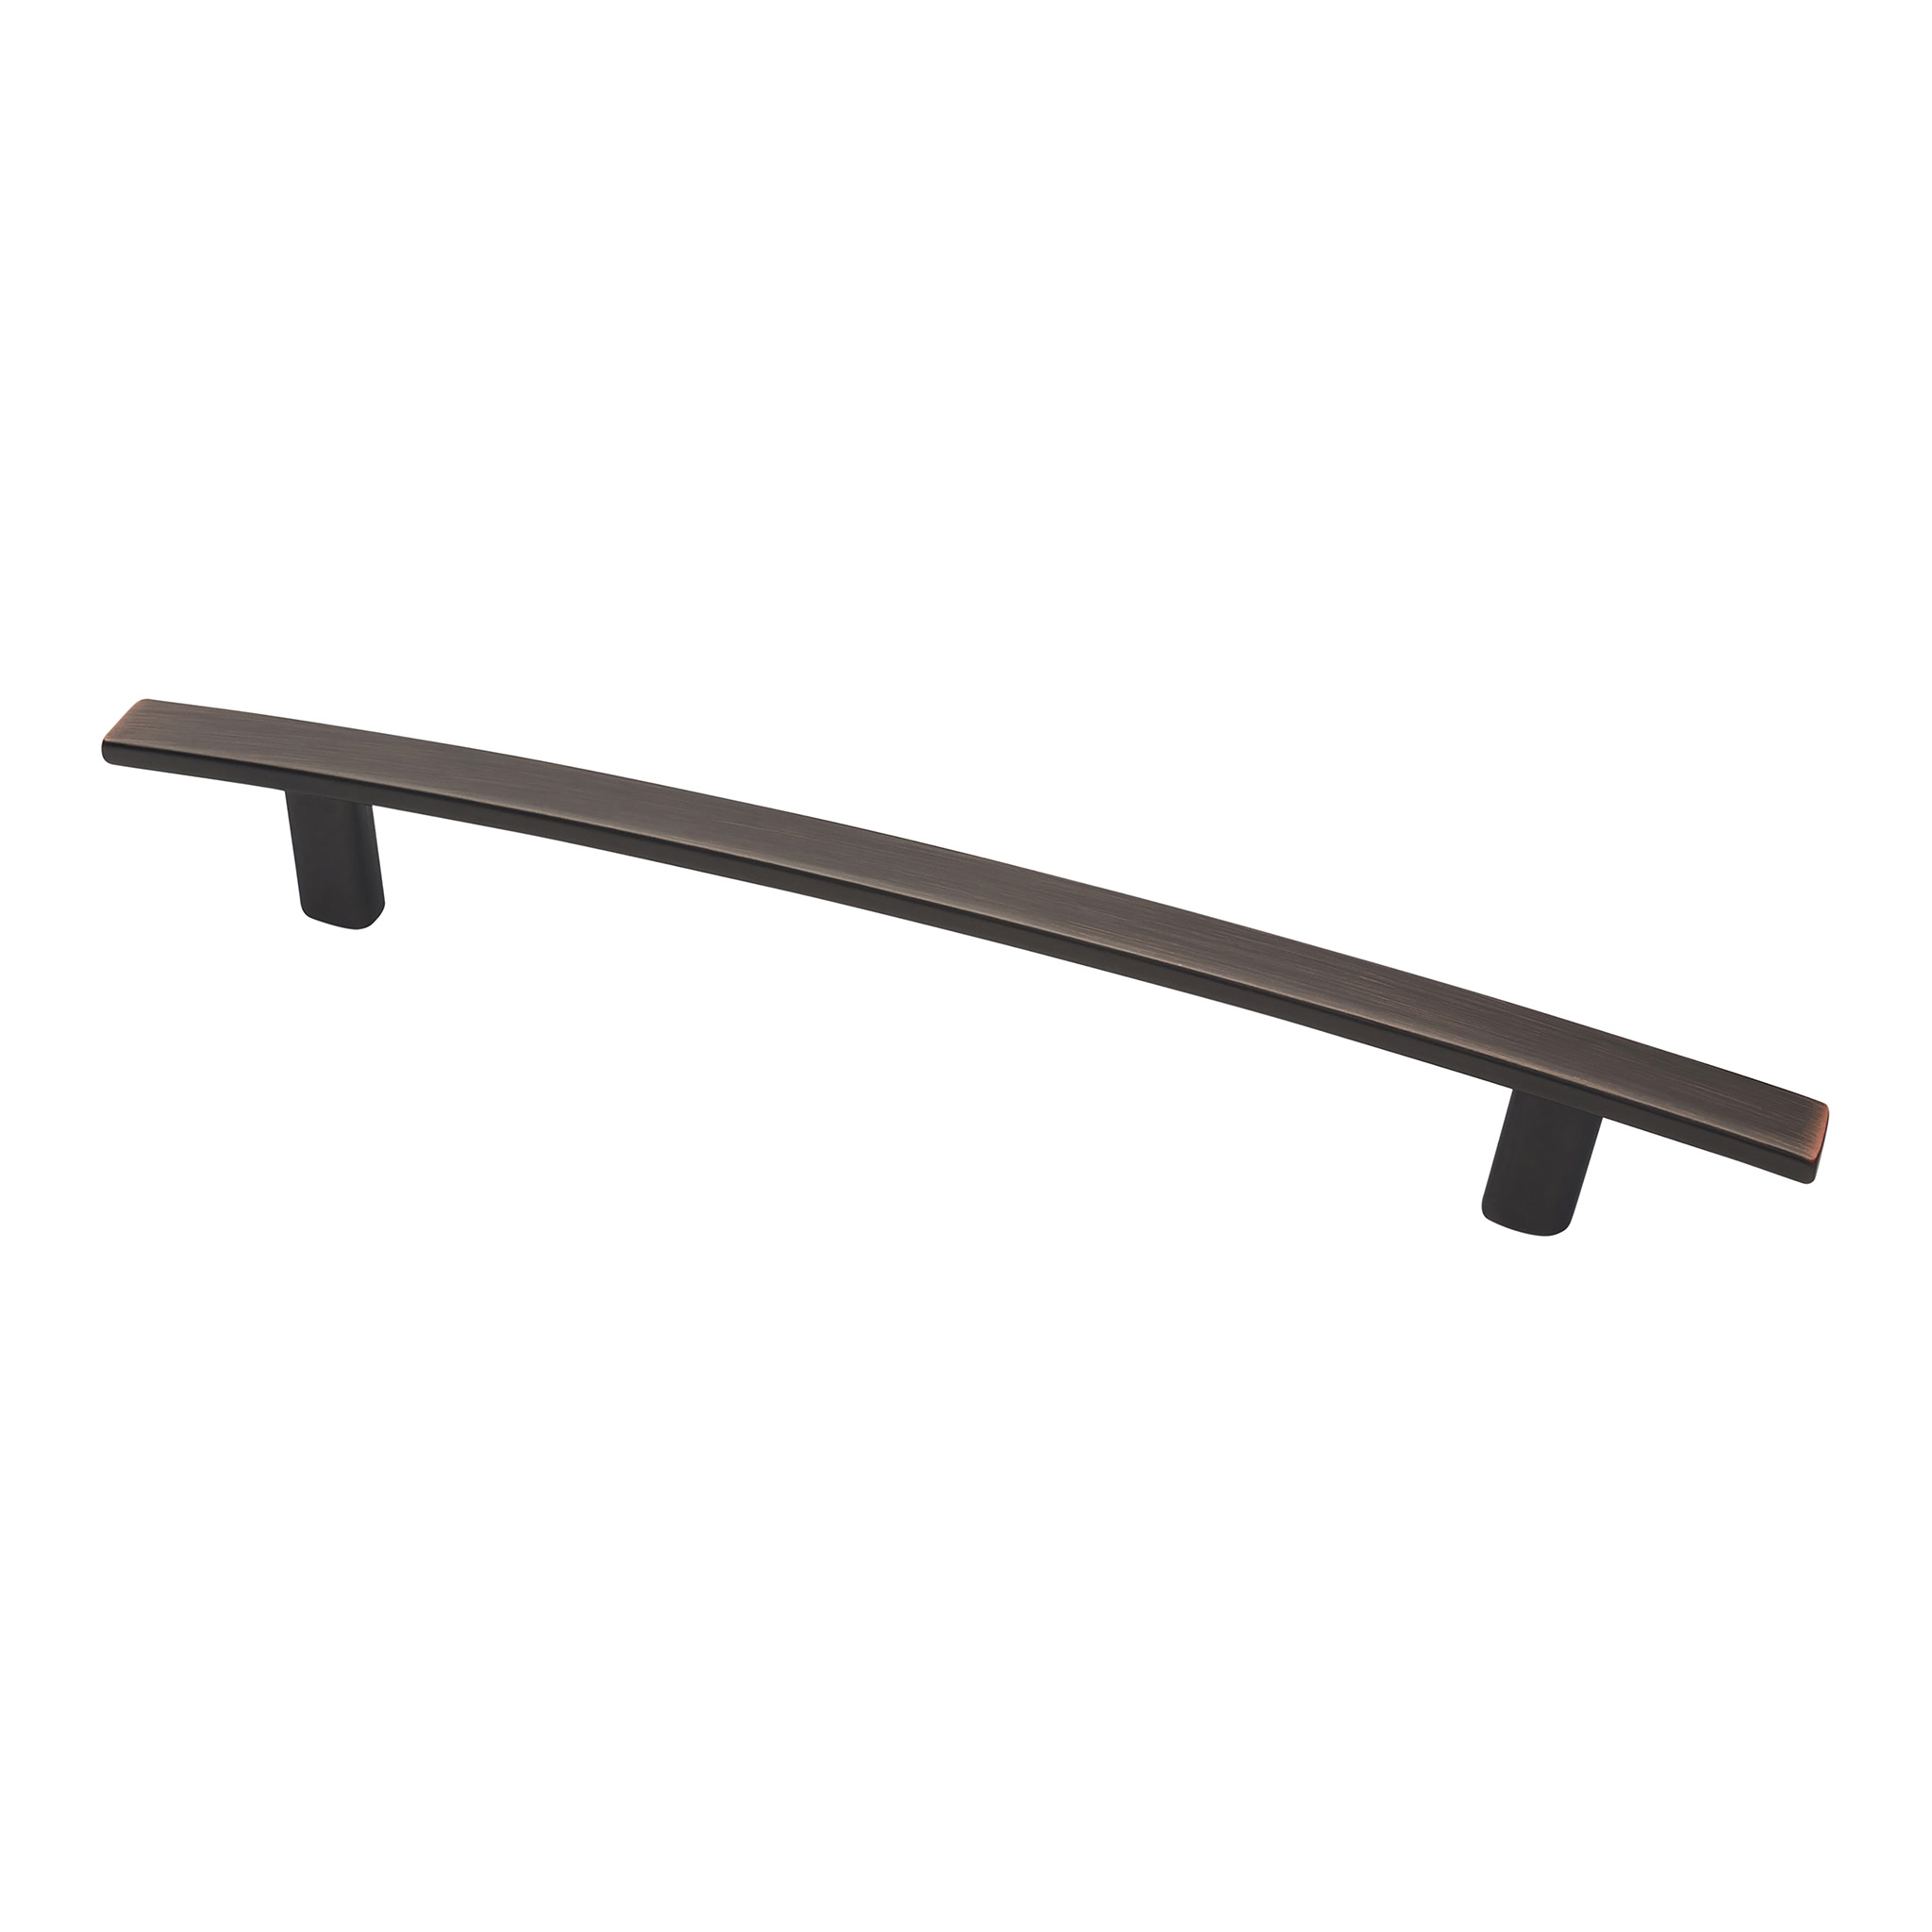 Kemsley Classic Pull, 160mm, Antique Copper Bronze Highlight